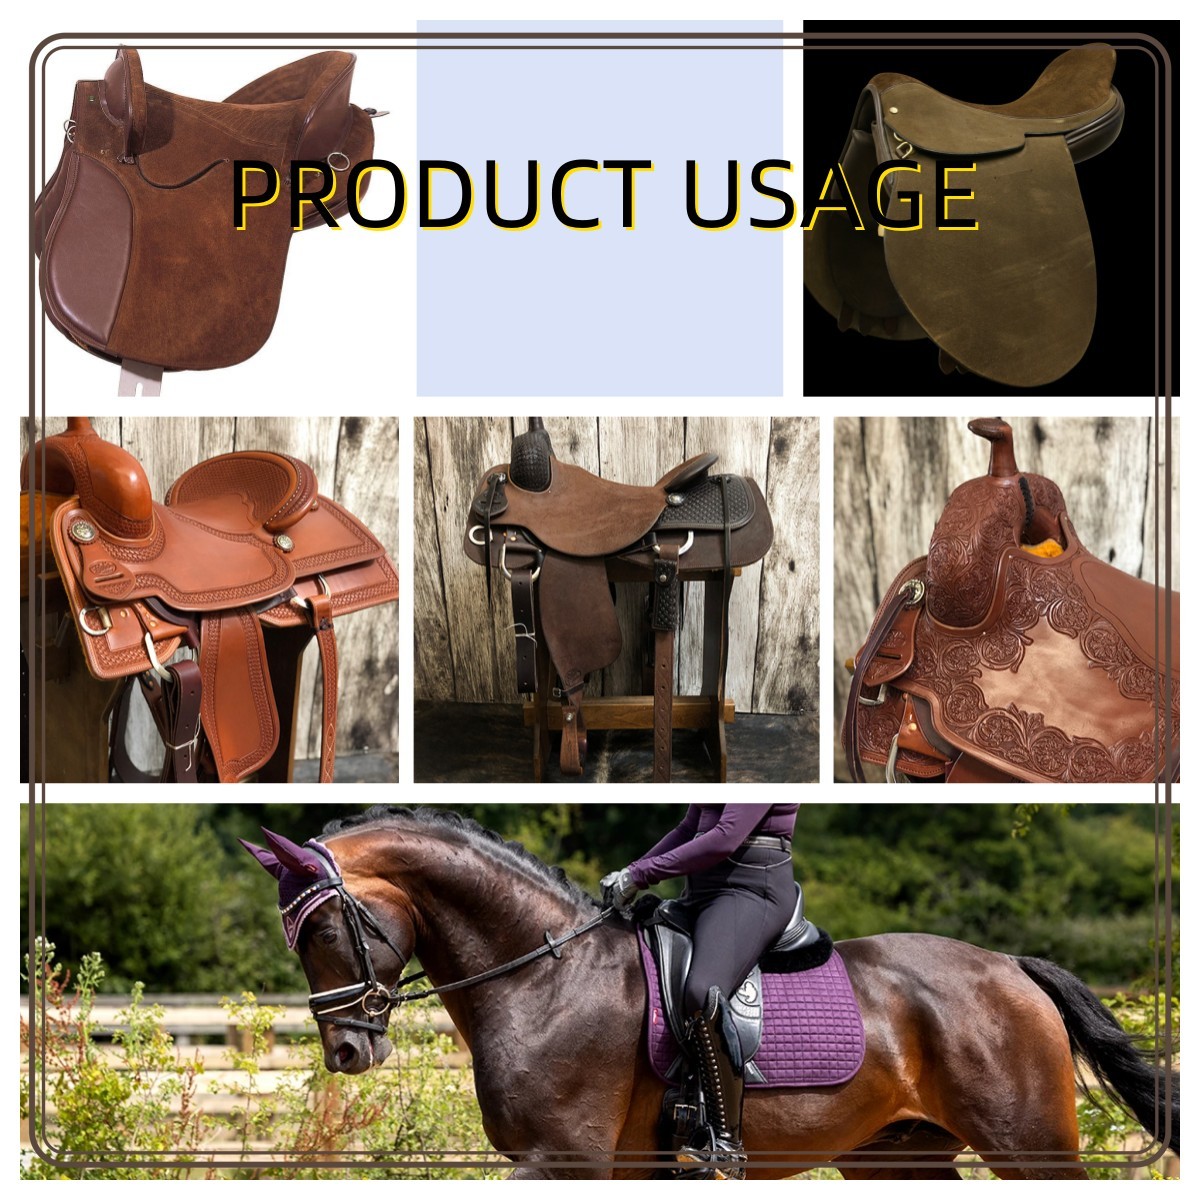 Chocolate Color Faux Suede Microfiber Leather for Horse Saddles